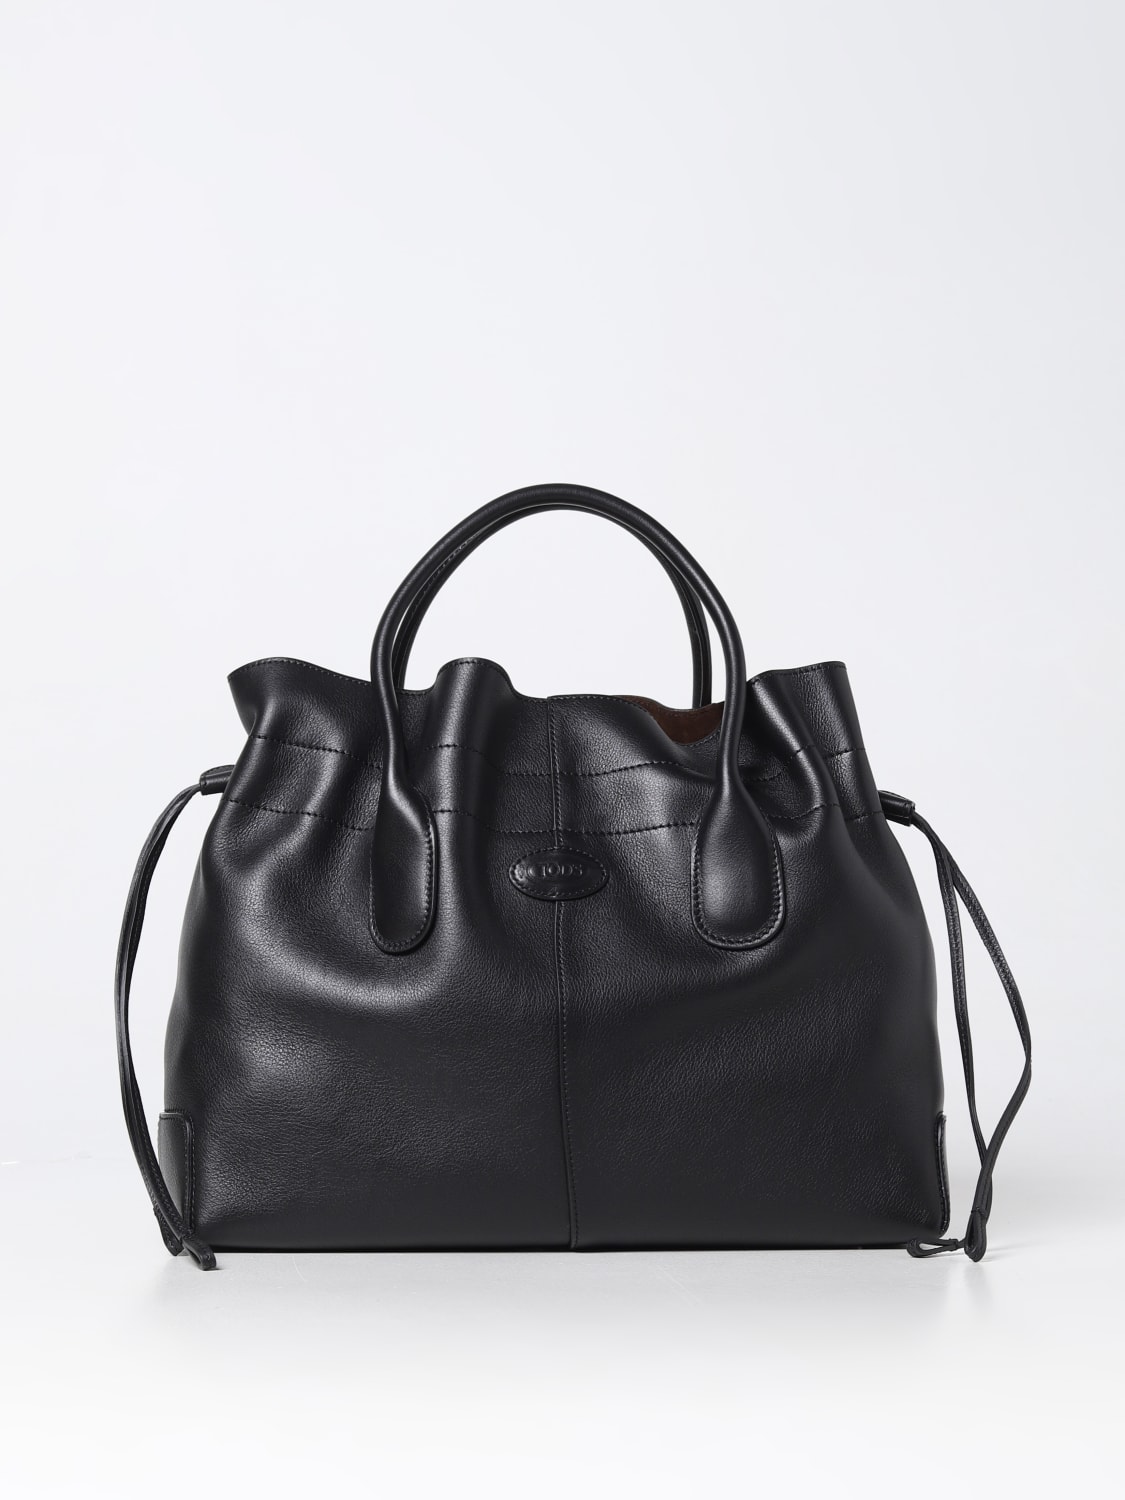 Micro leather tote bag in black - Tods